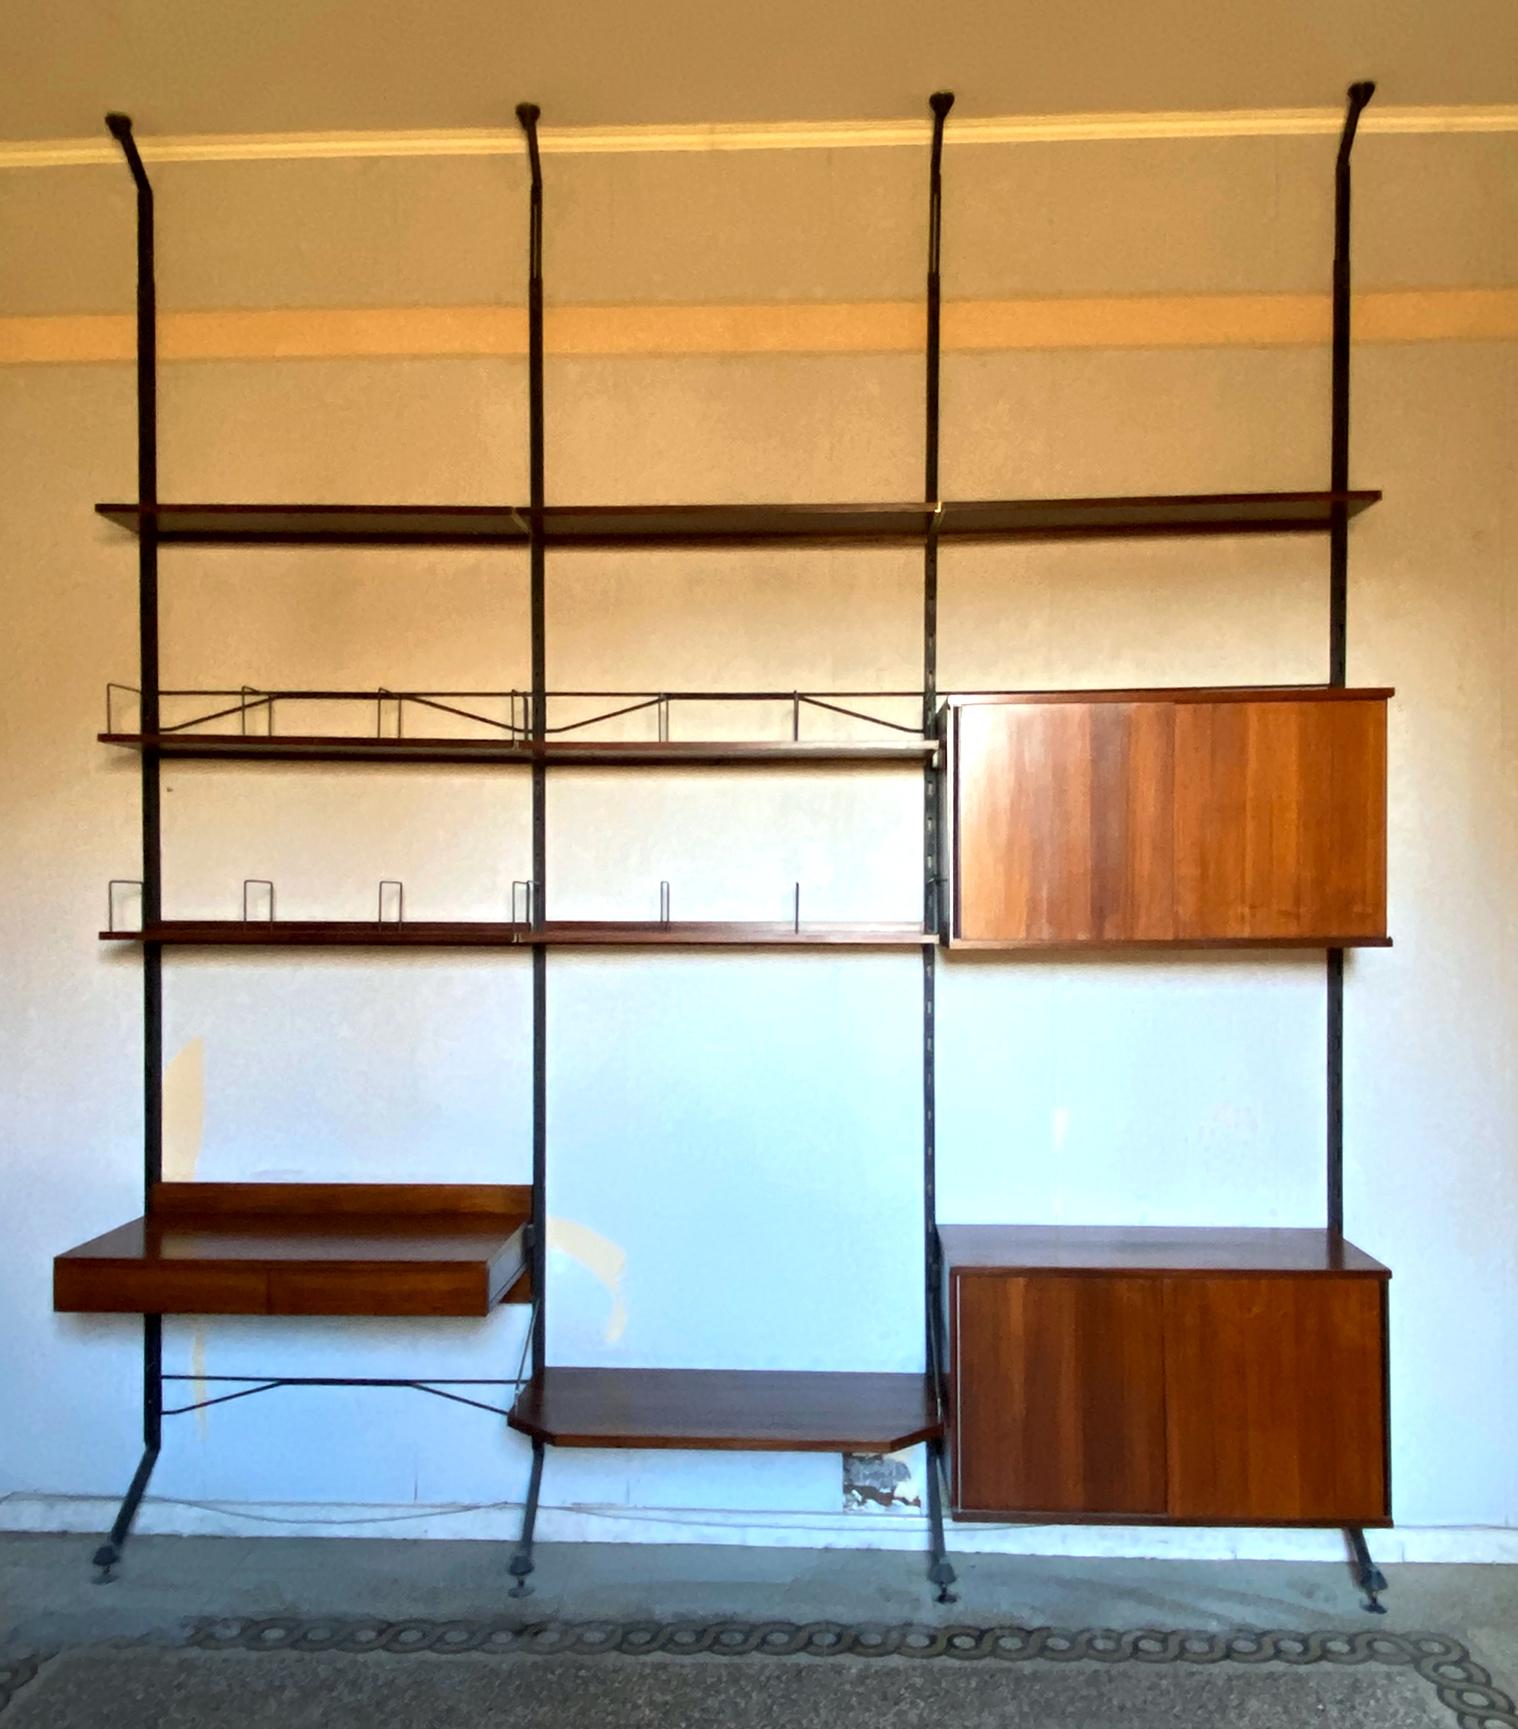 Designed by Ico Parisi 1958 for MiM, Rome. 
The bookcase consists of: three sections, shelves, a desk with drawers, two closed cabinets, a larger shelf for a TV and several bookshelves with metal stands to keep the books standing straight. Metal